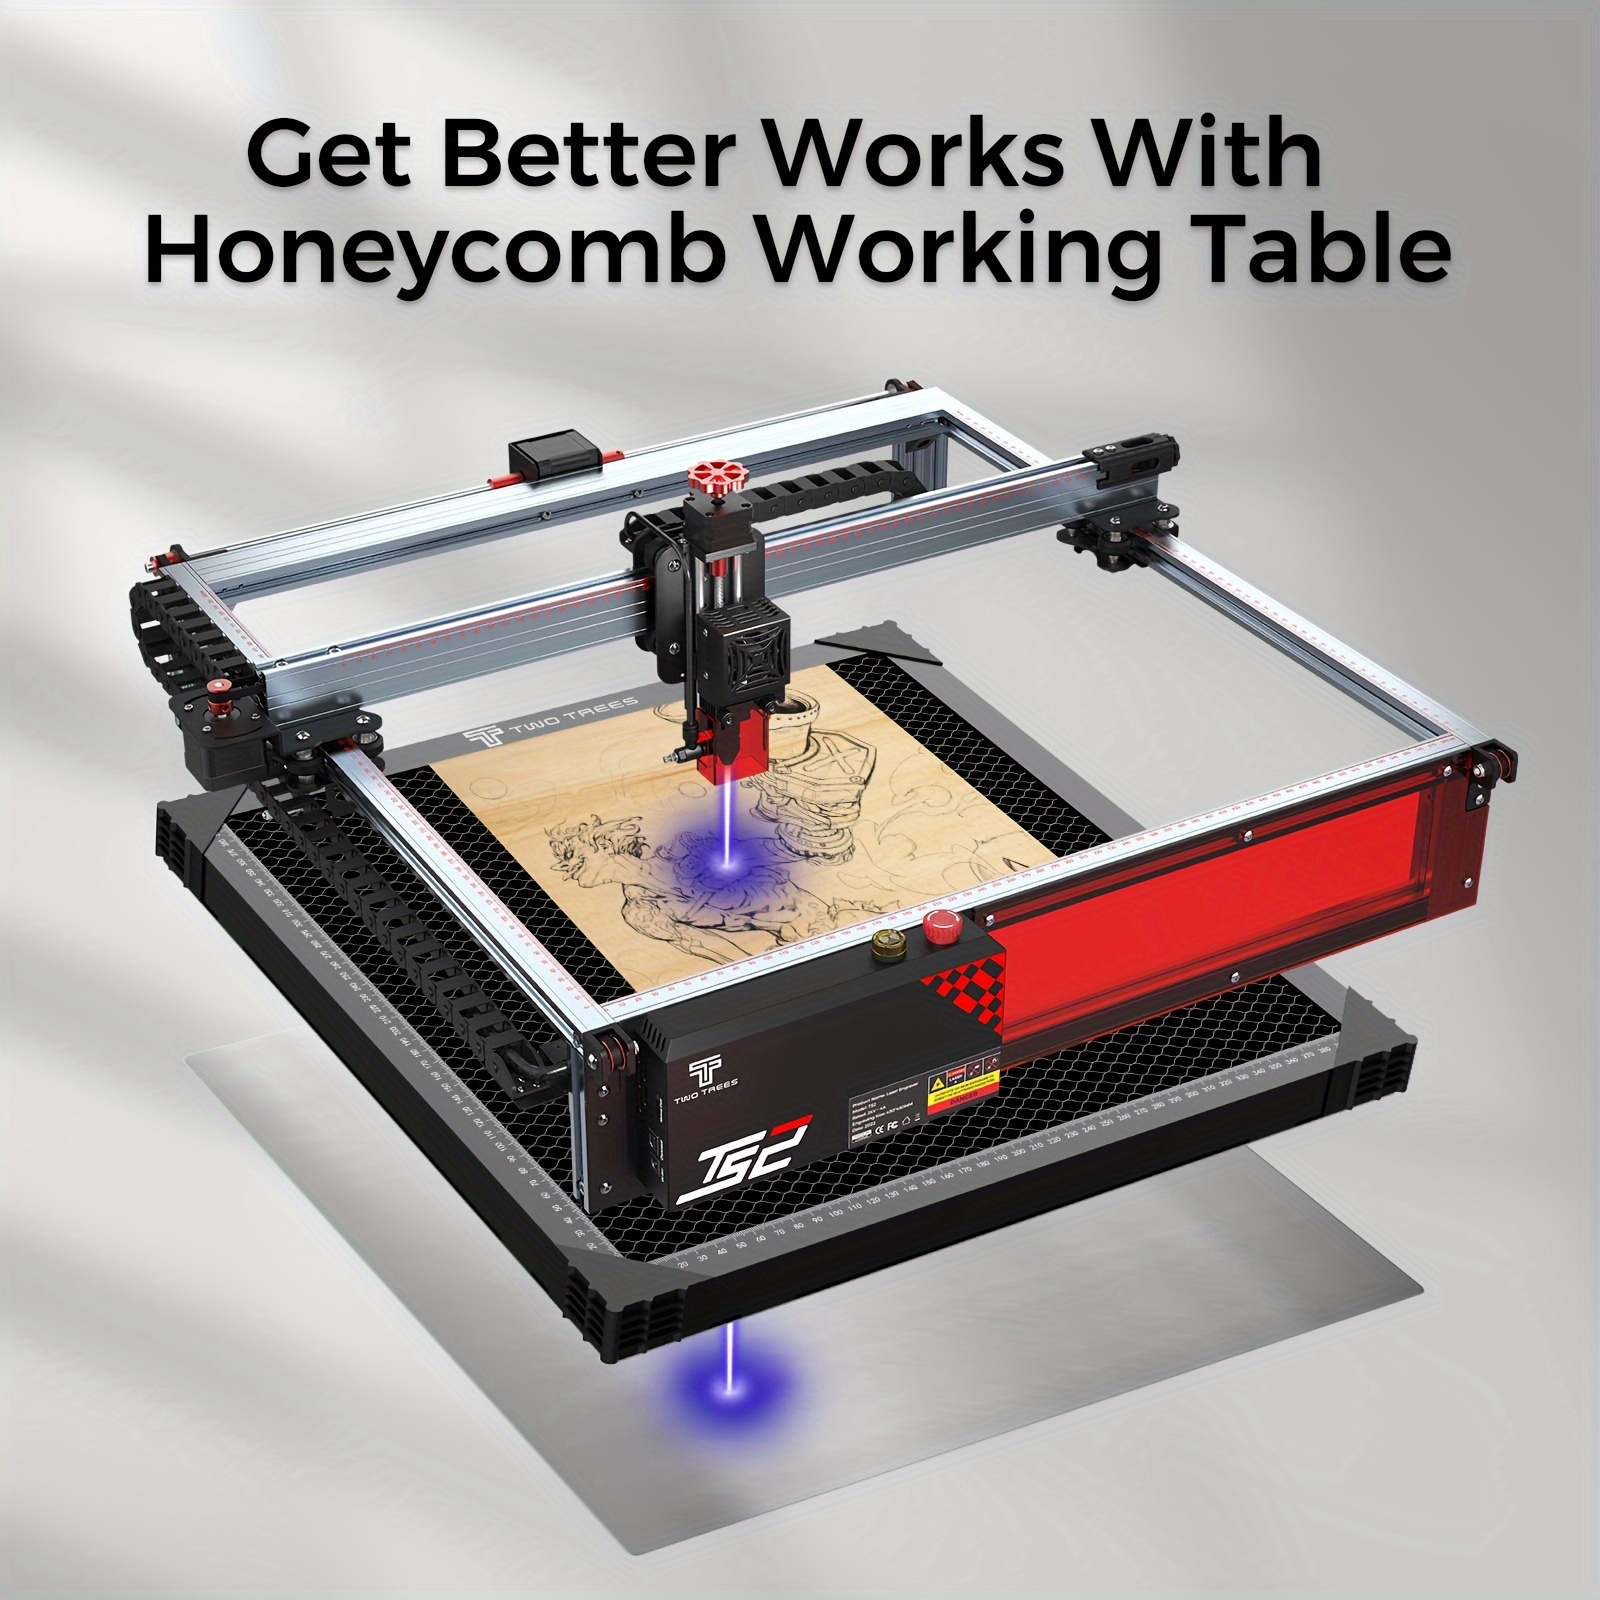 ORTUR Selected Honeycomb Laser Bed 440mm x 440mm, Laser Honeycomb Working  Table Panel for Laser Engraver Accessories, Fast Heat Dissipation, Desktop